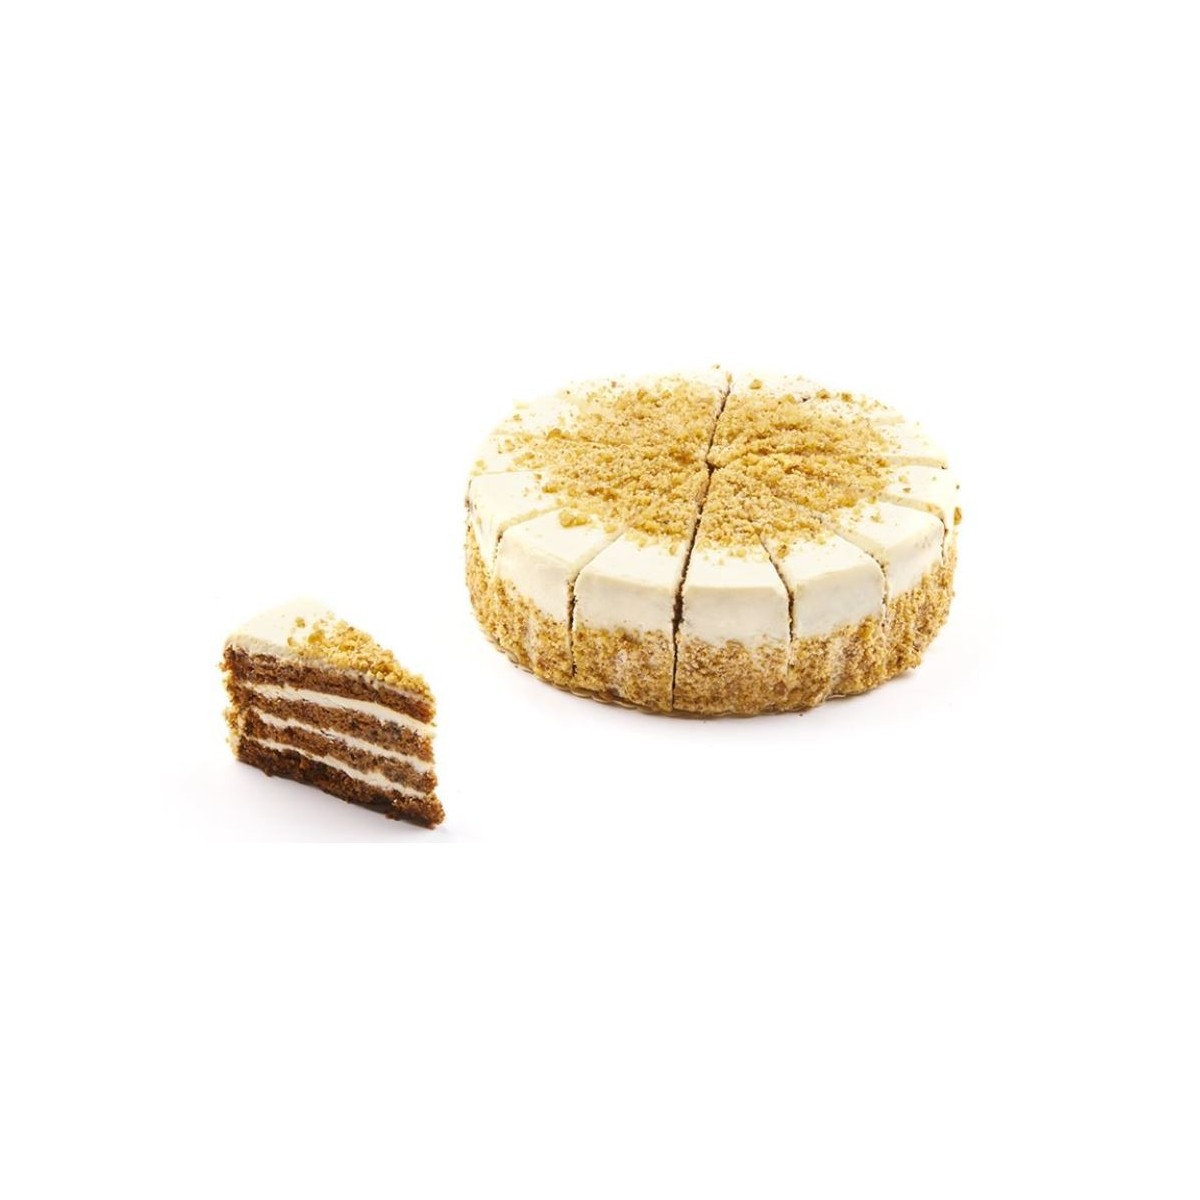 DAUPHINE 5002066 ICED CARROT CAKE WITH WALNUTSON/ORDER